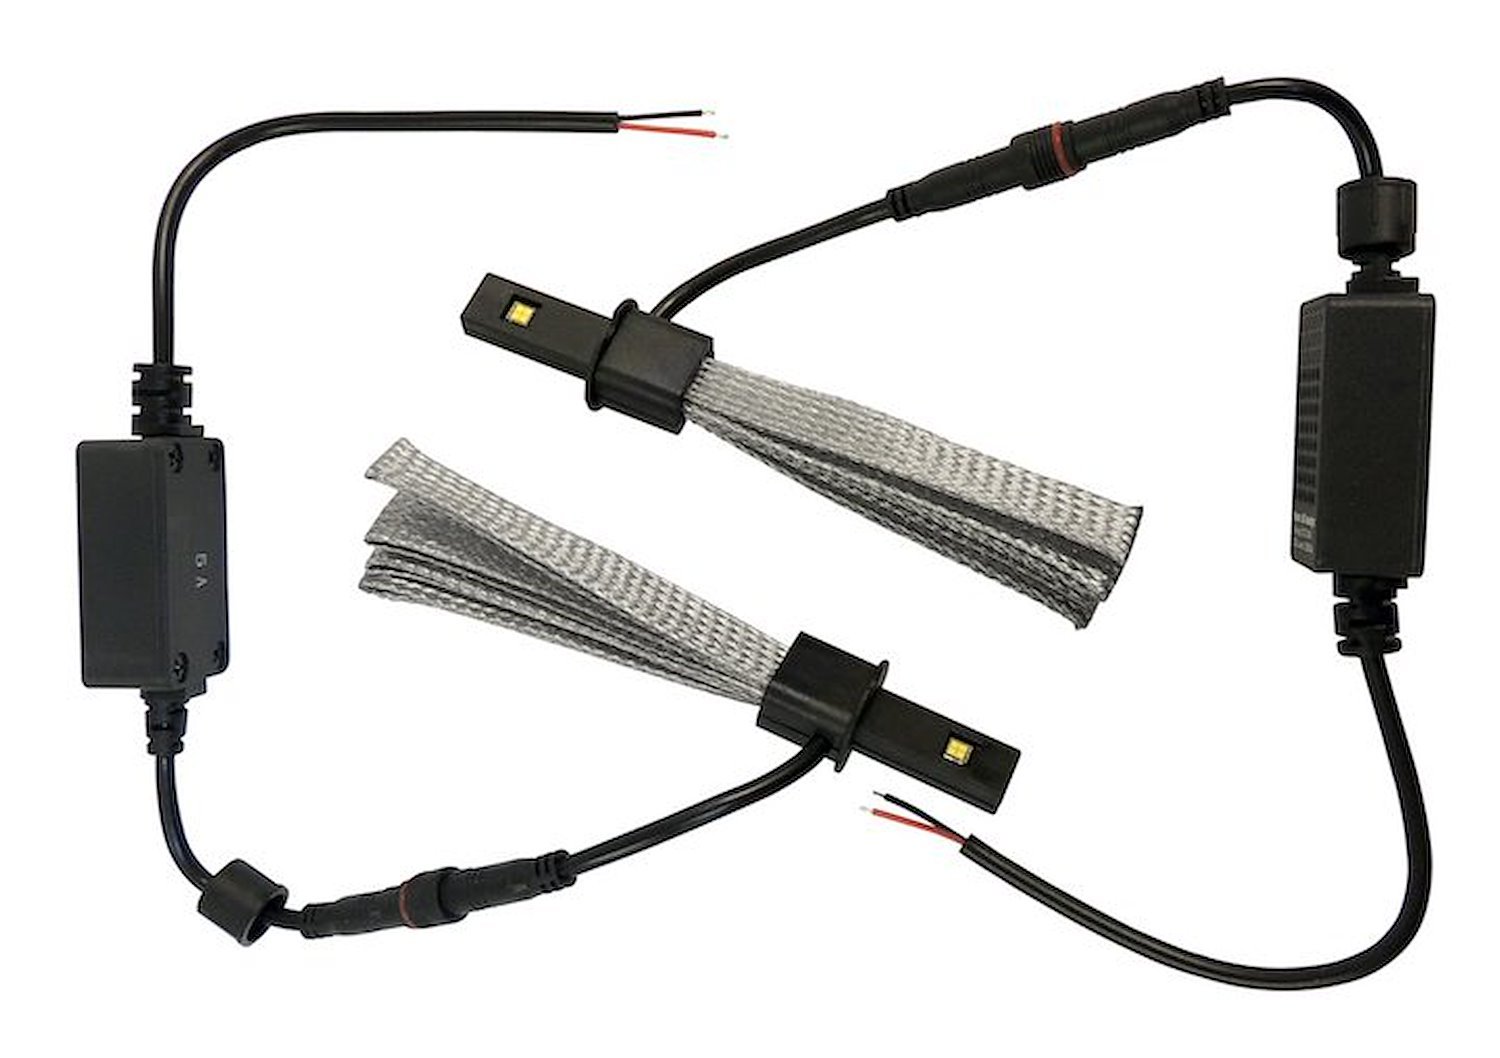 RT28050 6500K LED Headlight Bulb Kit for All Vehicles w/ H3 Style Bulb;Features Copper Weave Cloth Heat Sink